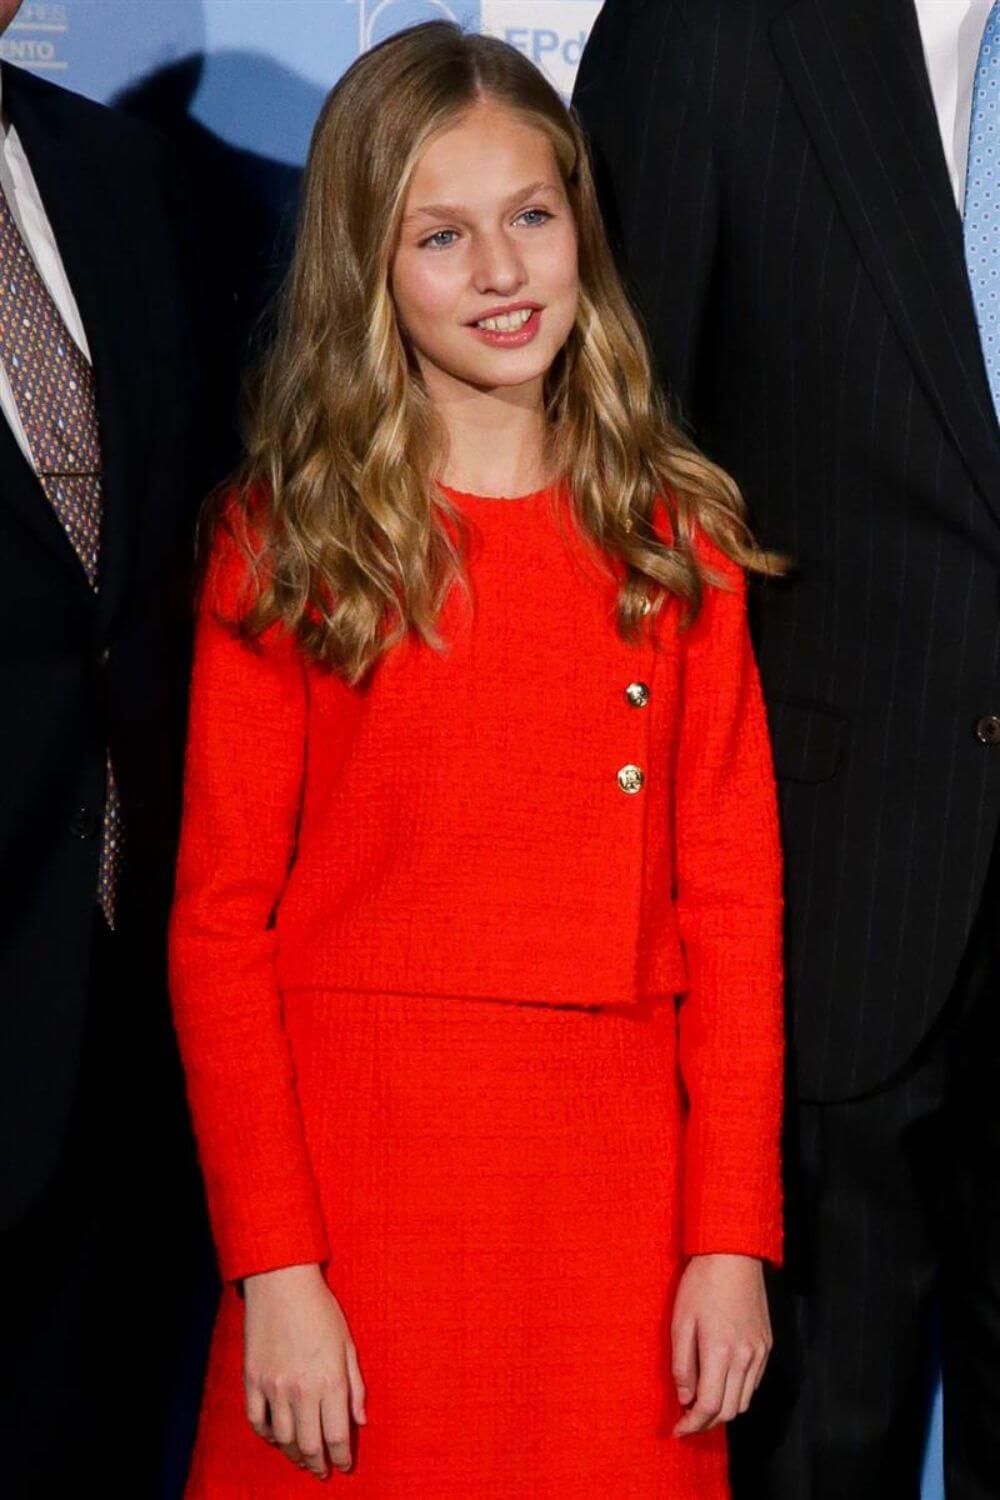 Elegant red gown worn by Princess Leonor